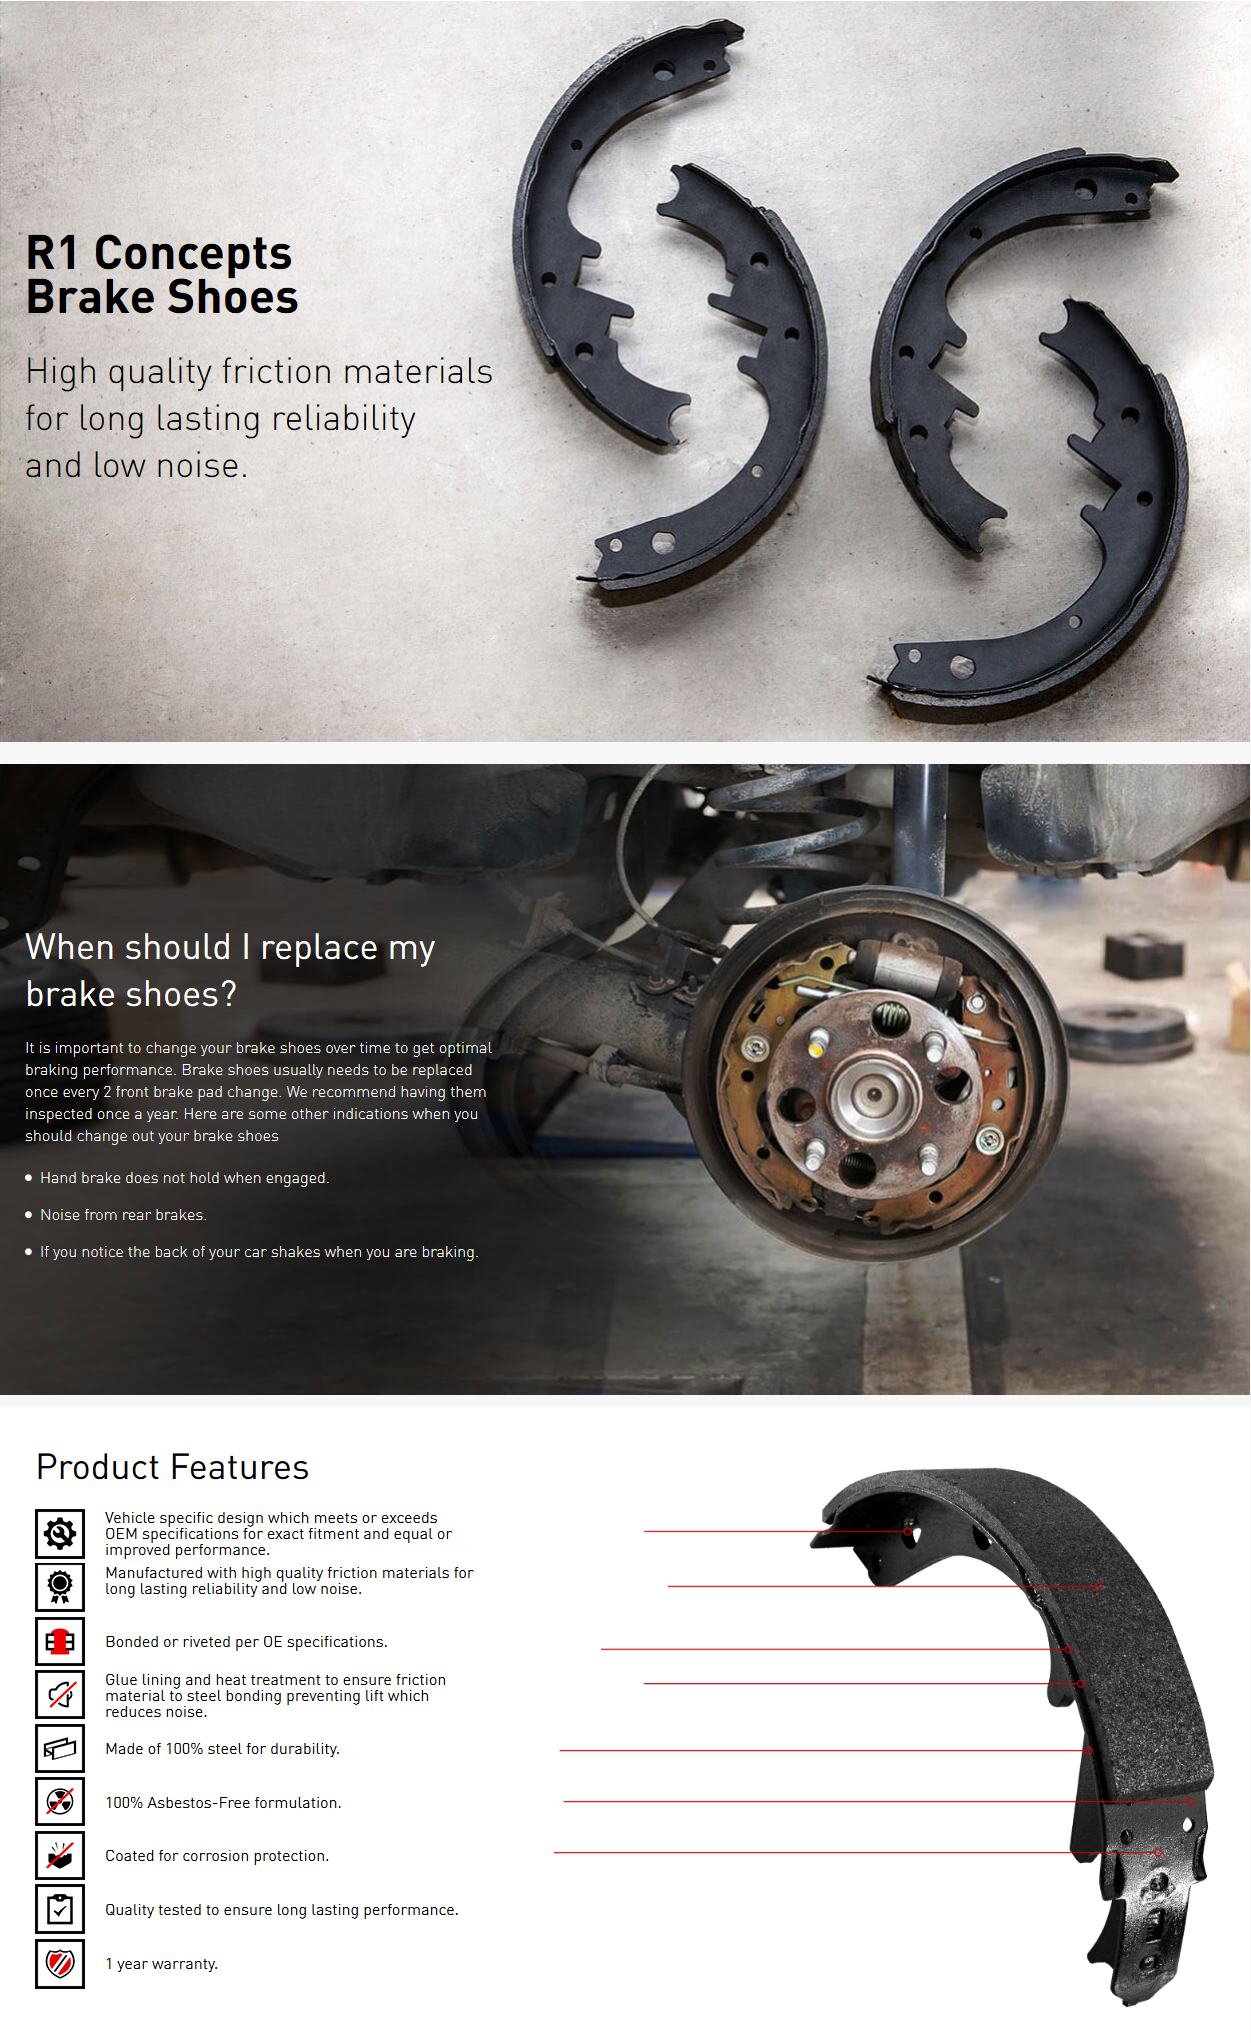 Brake Shoes Features